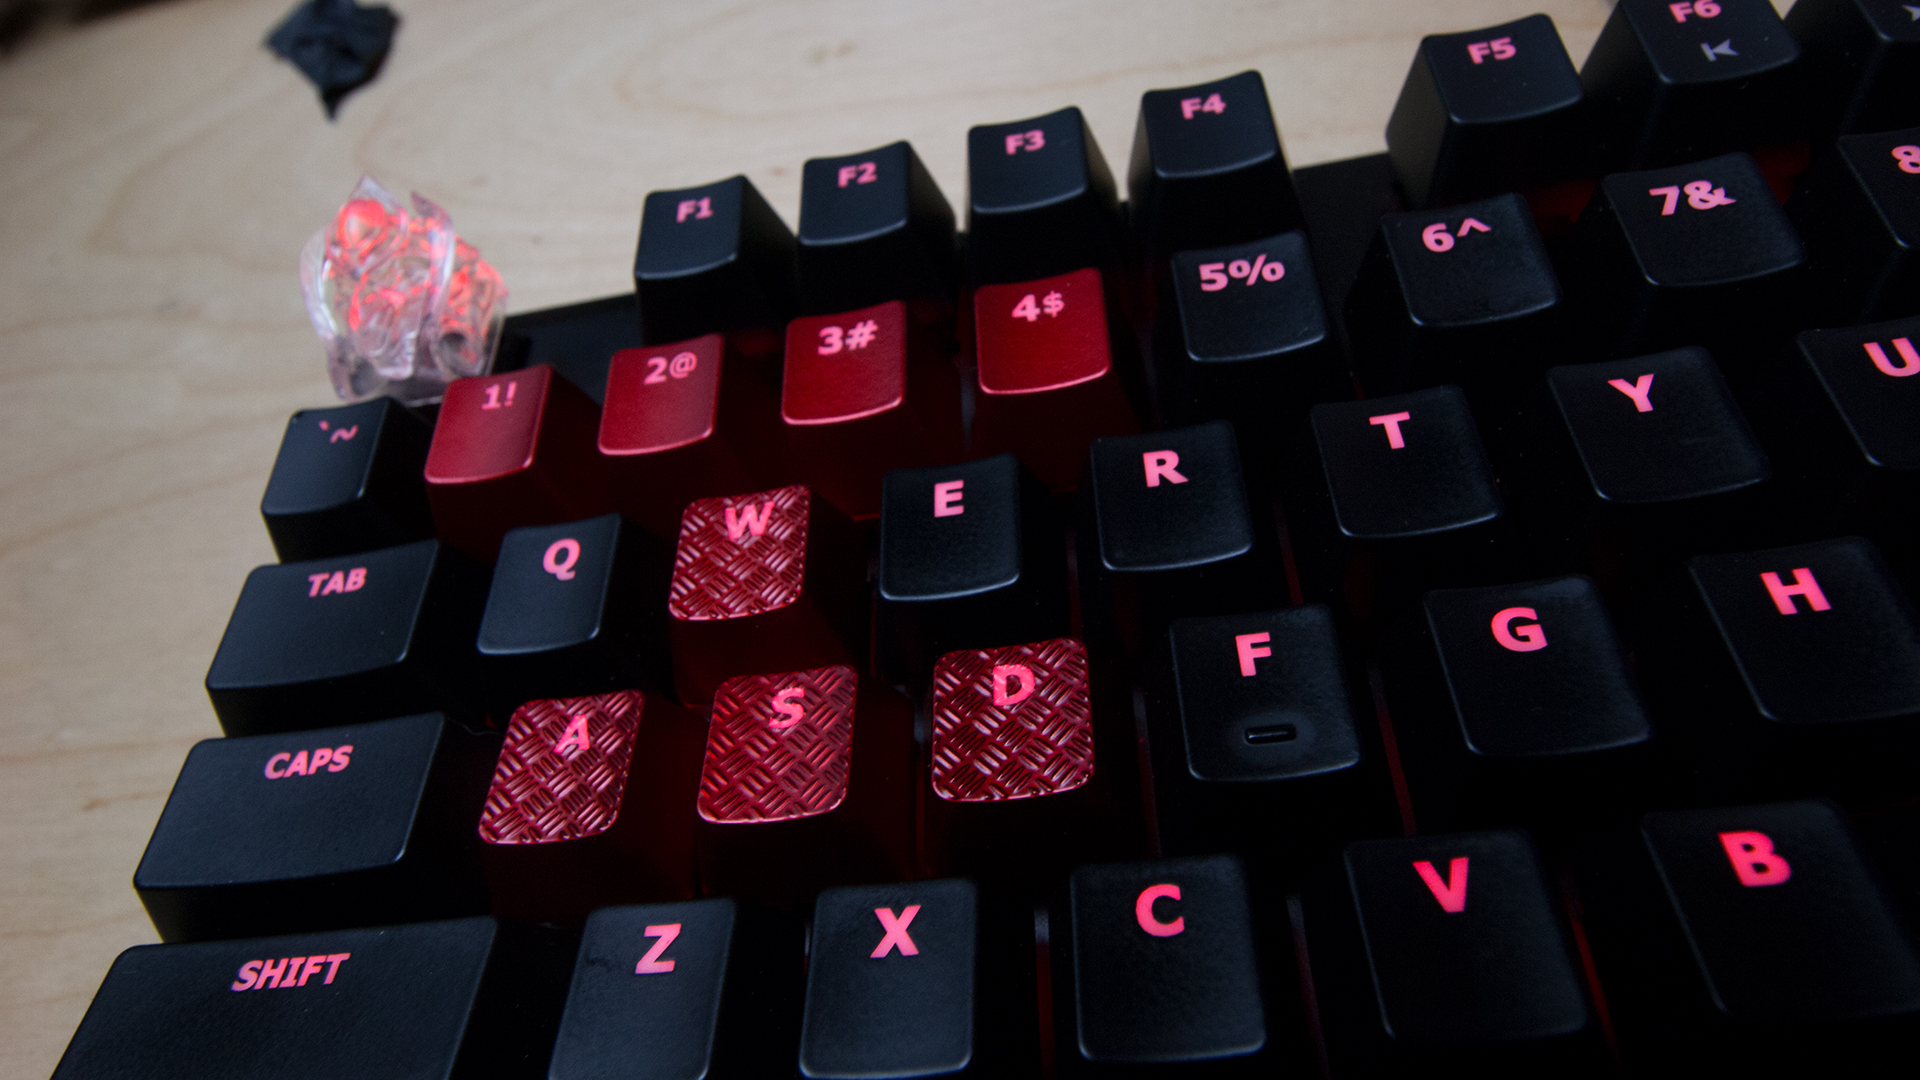 HyperX Alloy FPS Mechanical Gaming Keyboard Review: A Happy Minimum